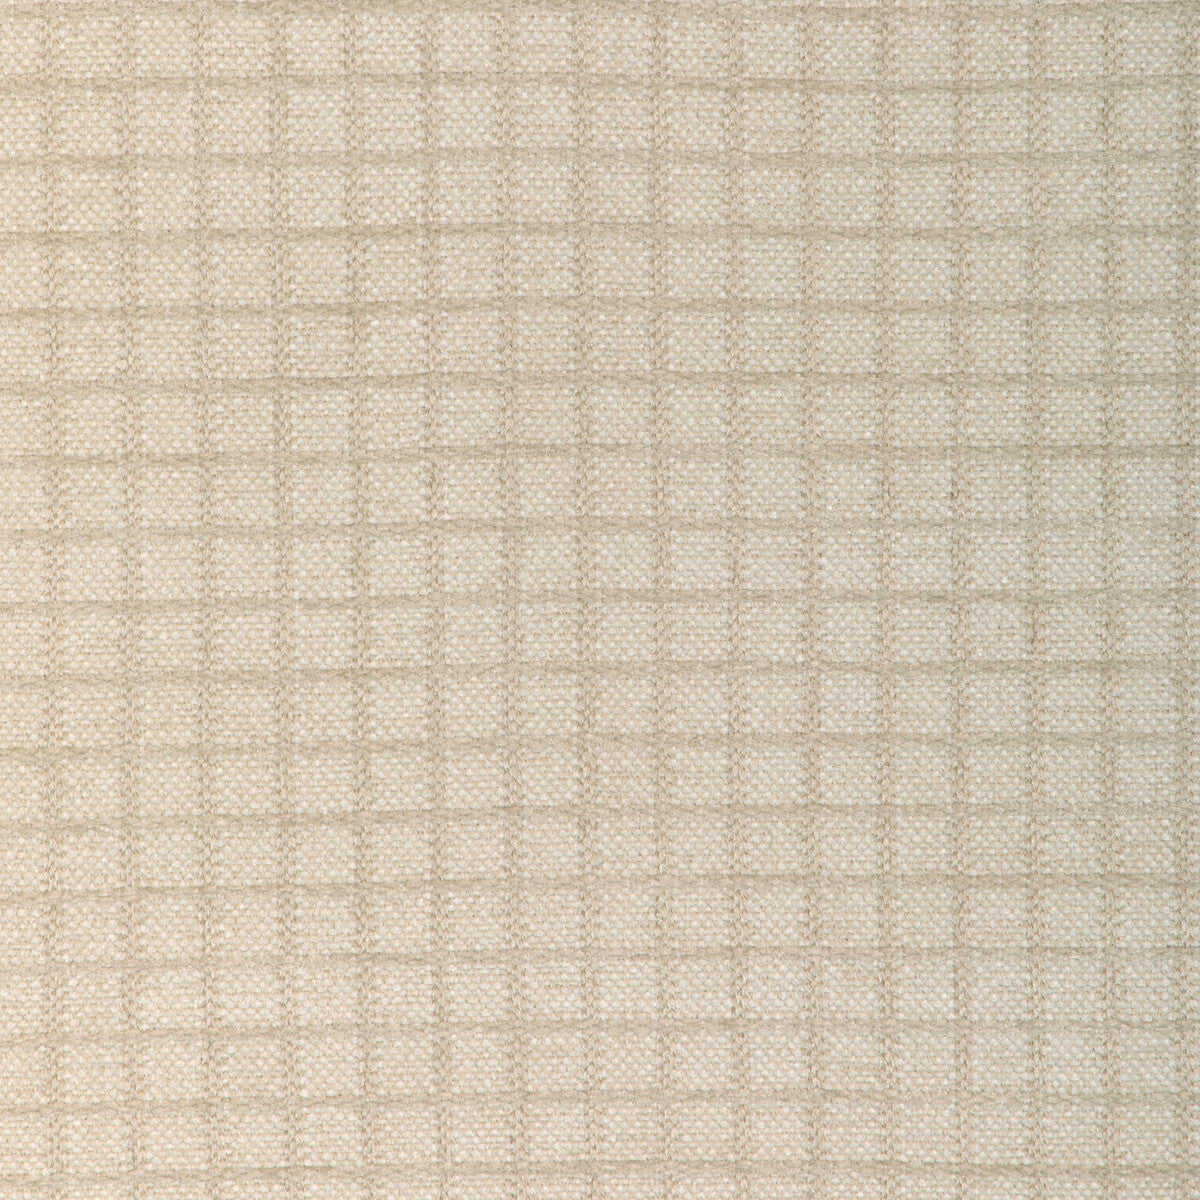 Chiron Texture fabric in ivory color - pattern 8023155.1.0 - by Brunschwig &amp; Fils in the Chambery Textures IV collection